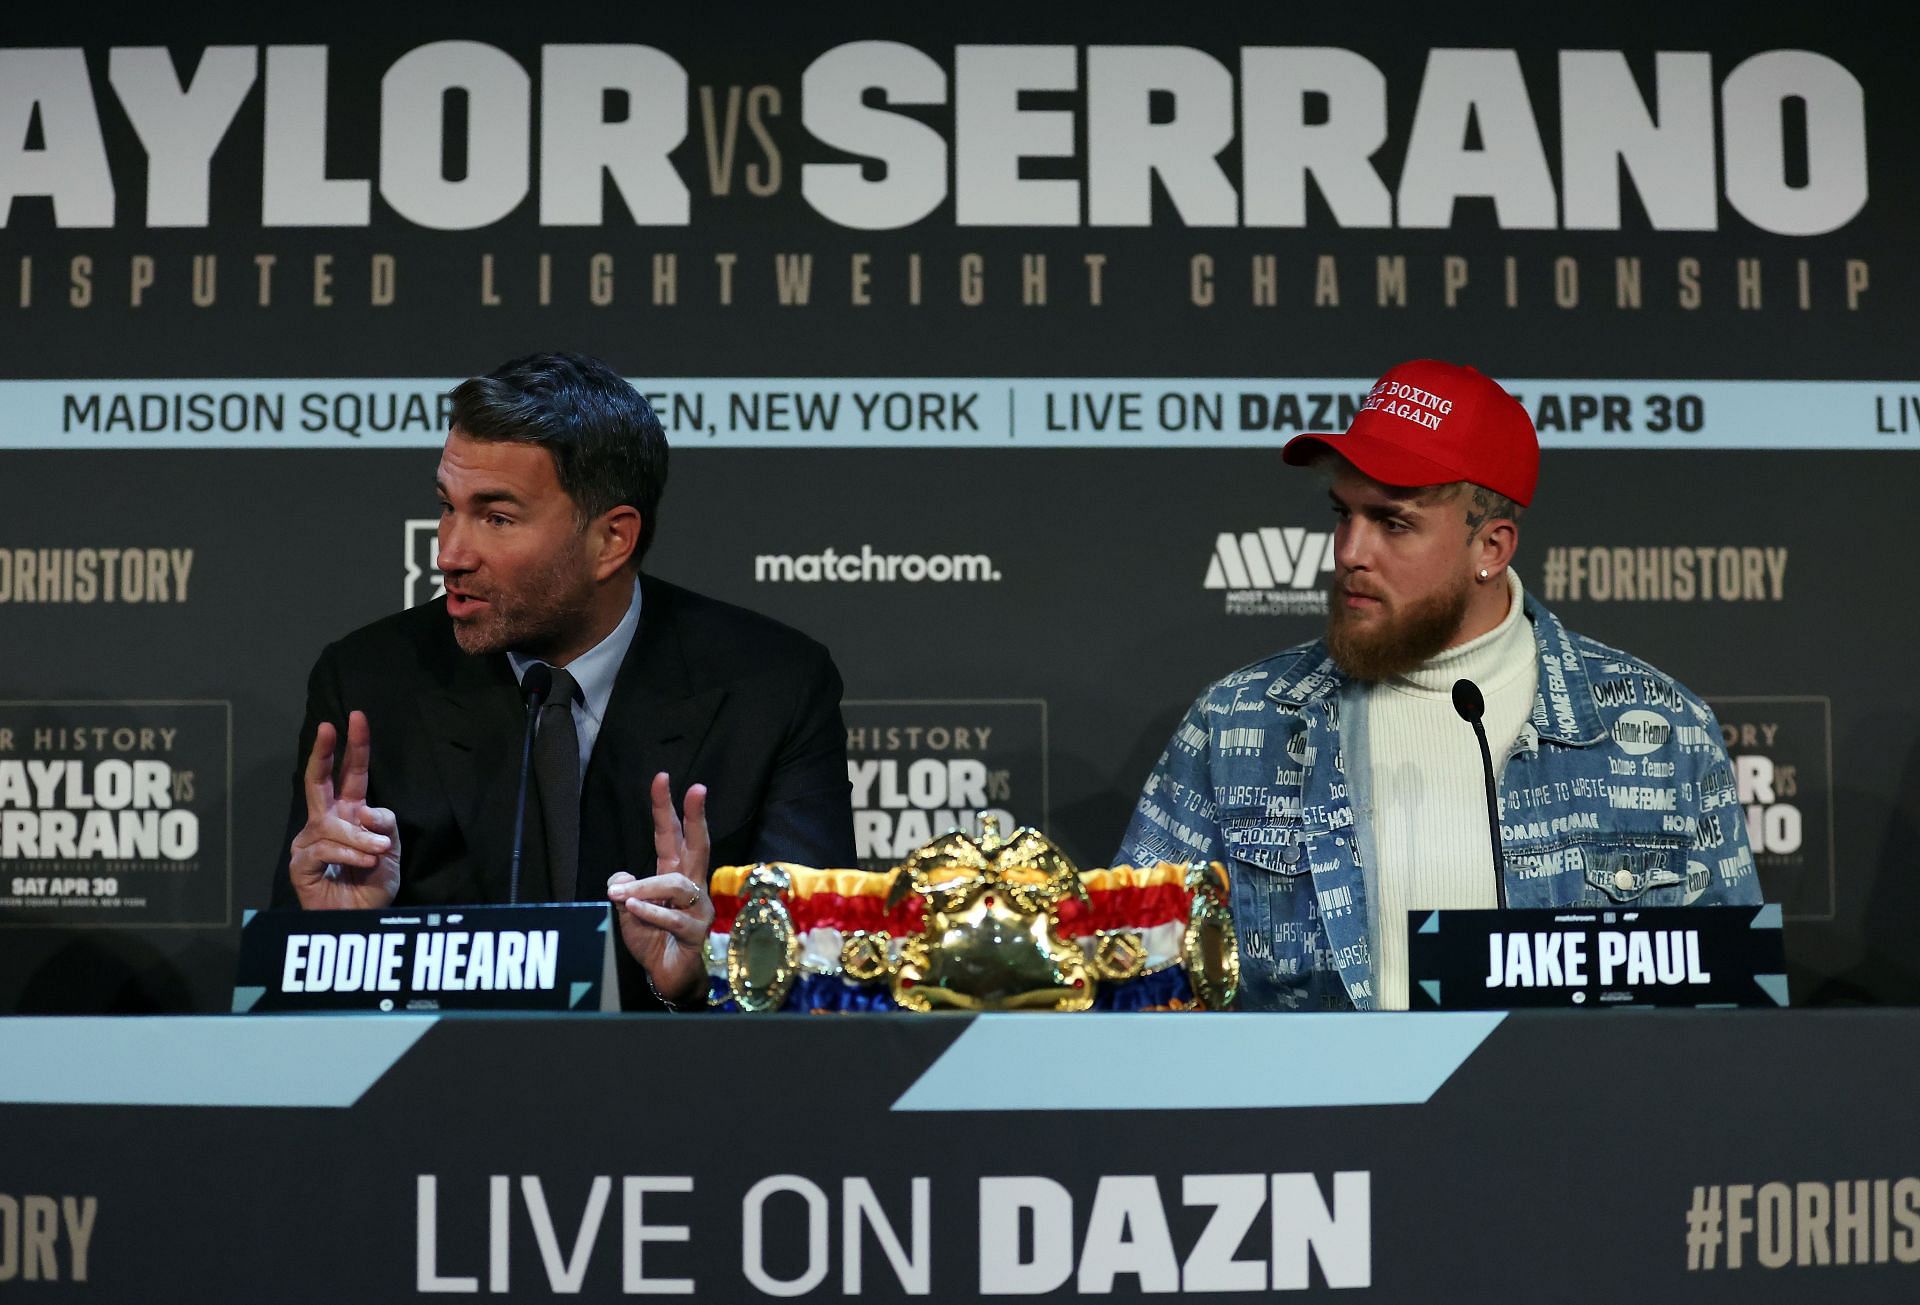 Eddie Hearn (left) and Jake Paul (right) - Via Getty Images